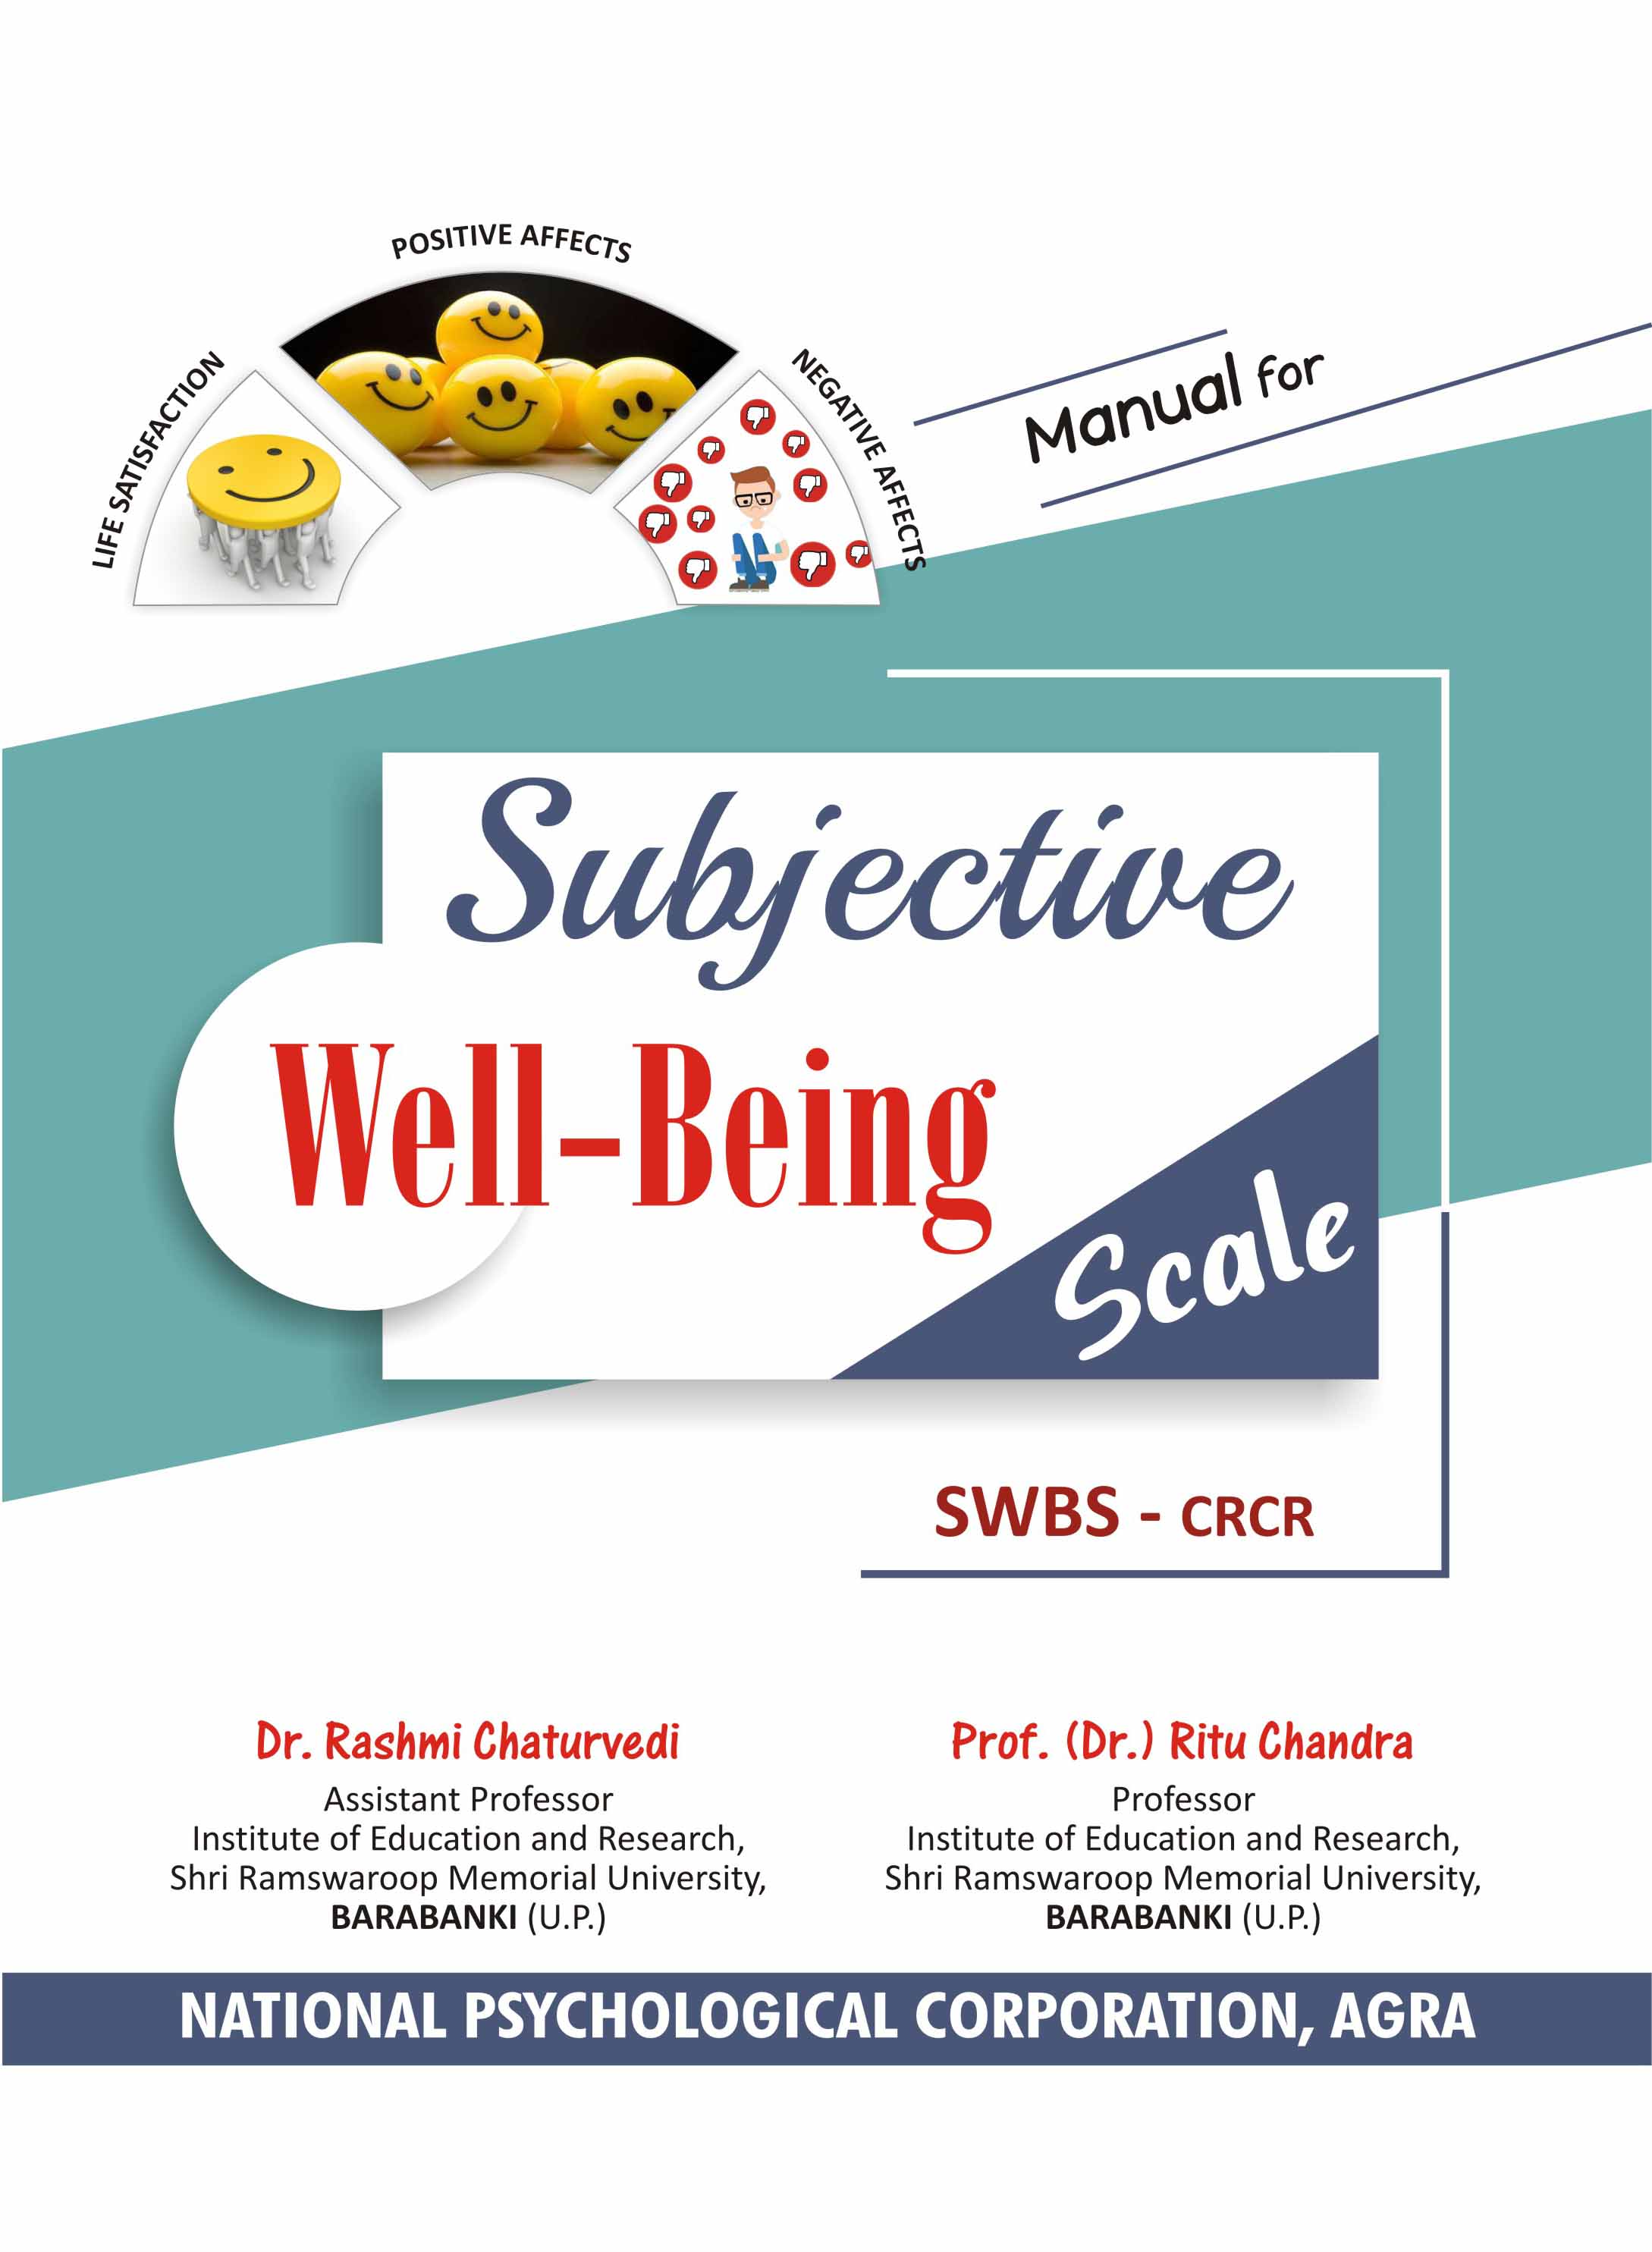 SUBJECTIVE-WELL-BEING-SCALE